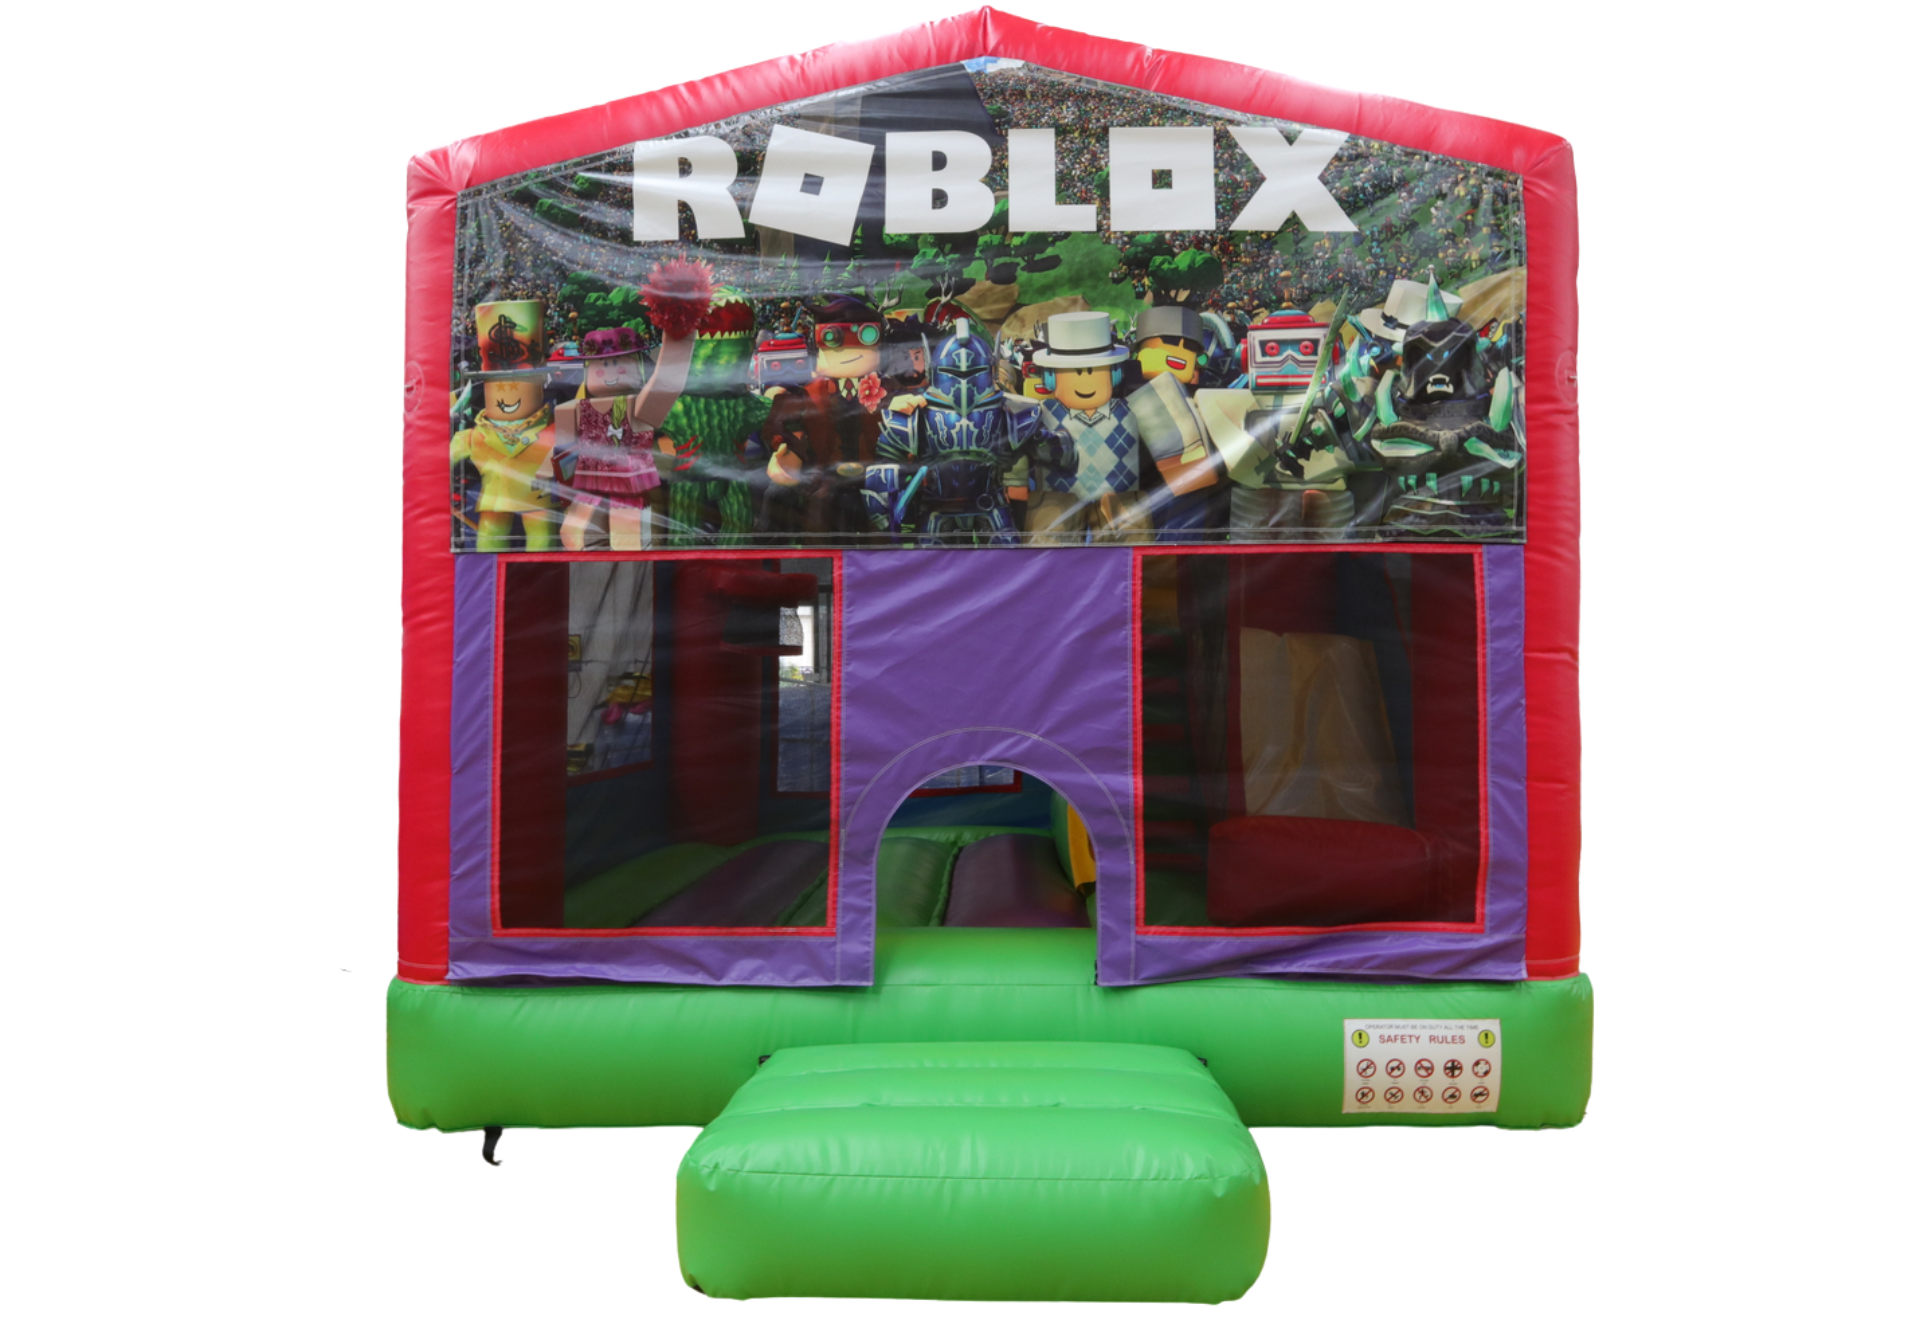 Roblox Bounce House - Hire Price $200 